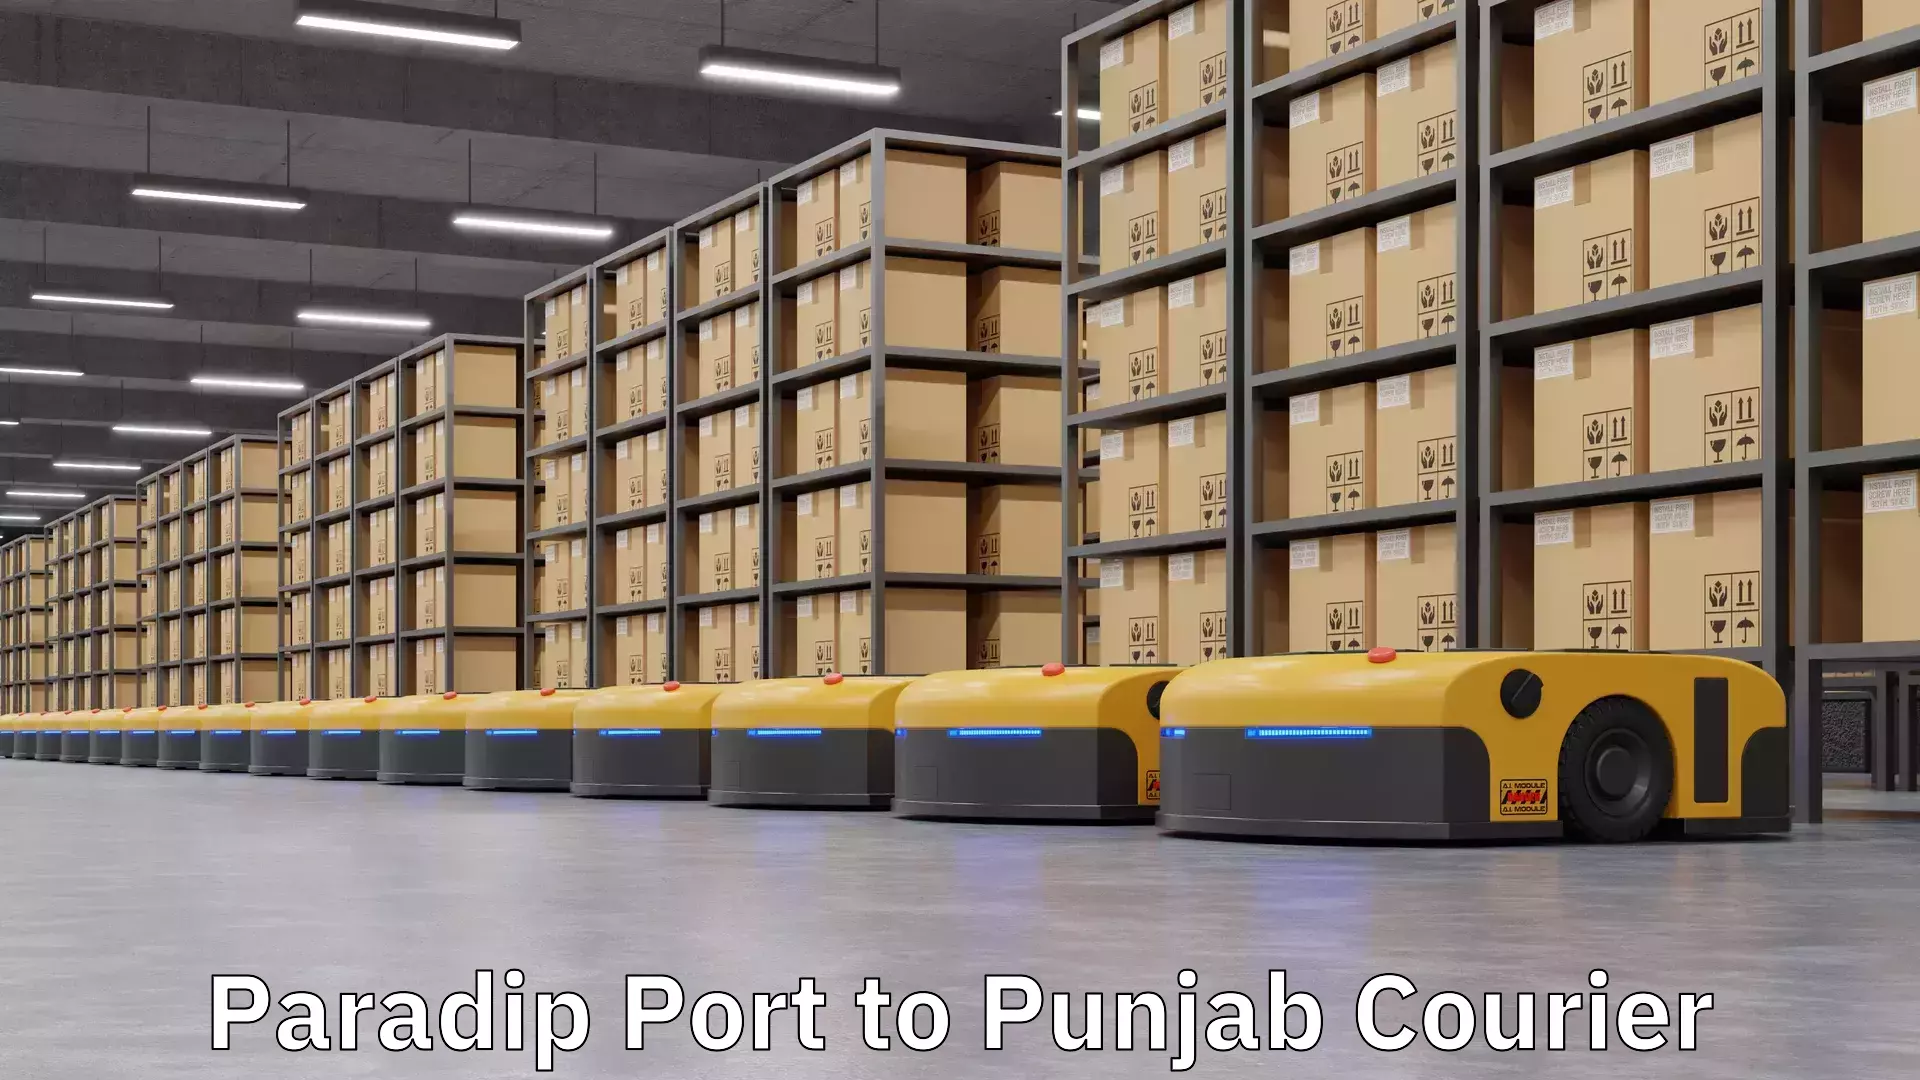 Cost-effective courier solutions Paradip Port to Punjab